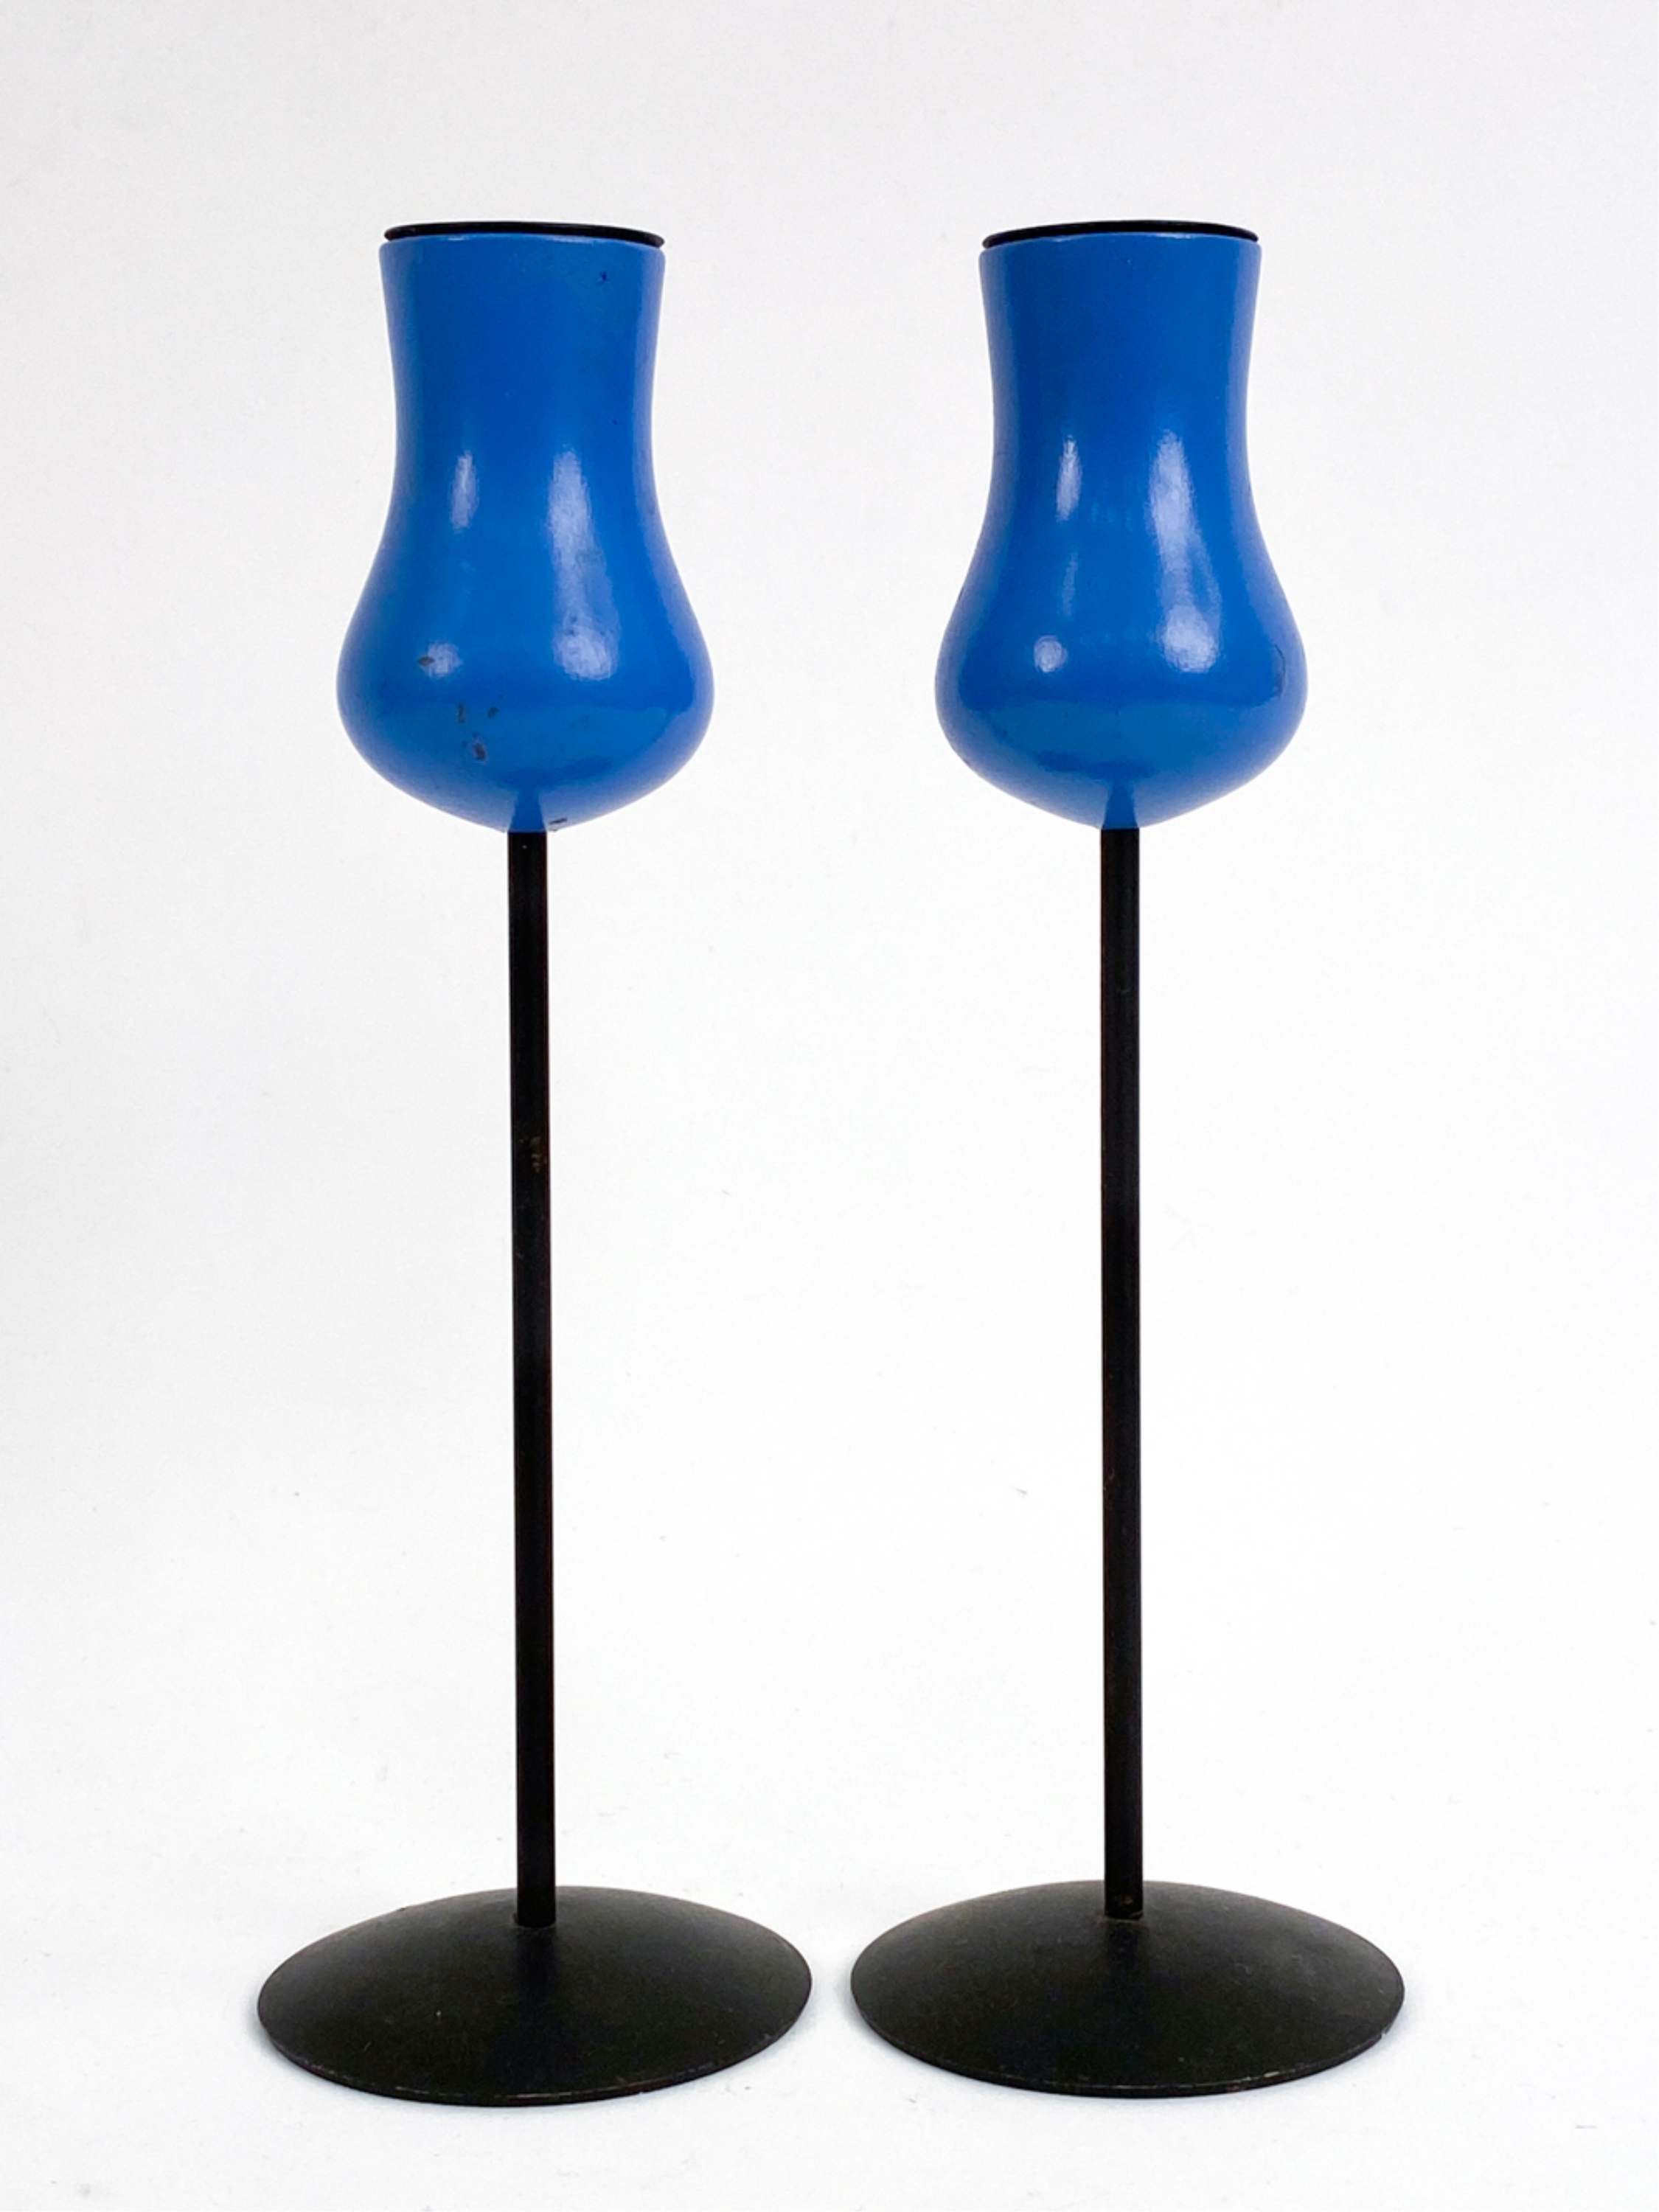 DANISH MODERN CANDLE HOLDERS by Laurids Lonborg, circa 1960s